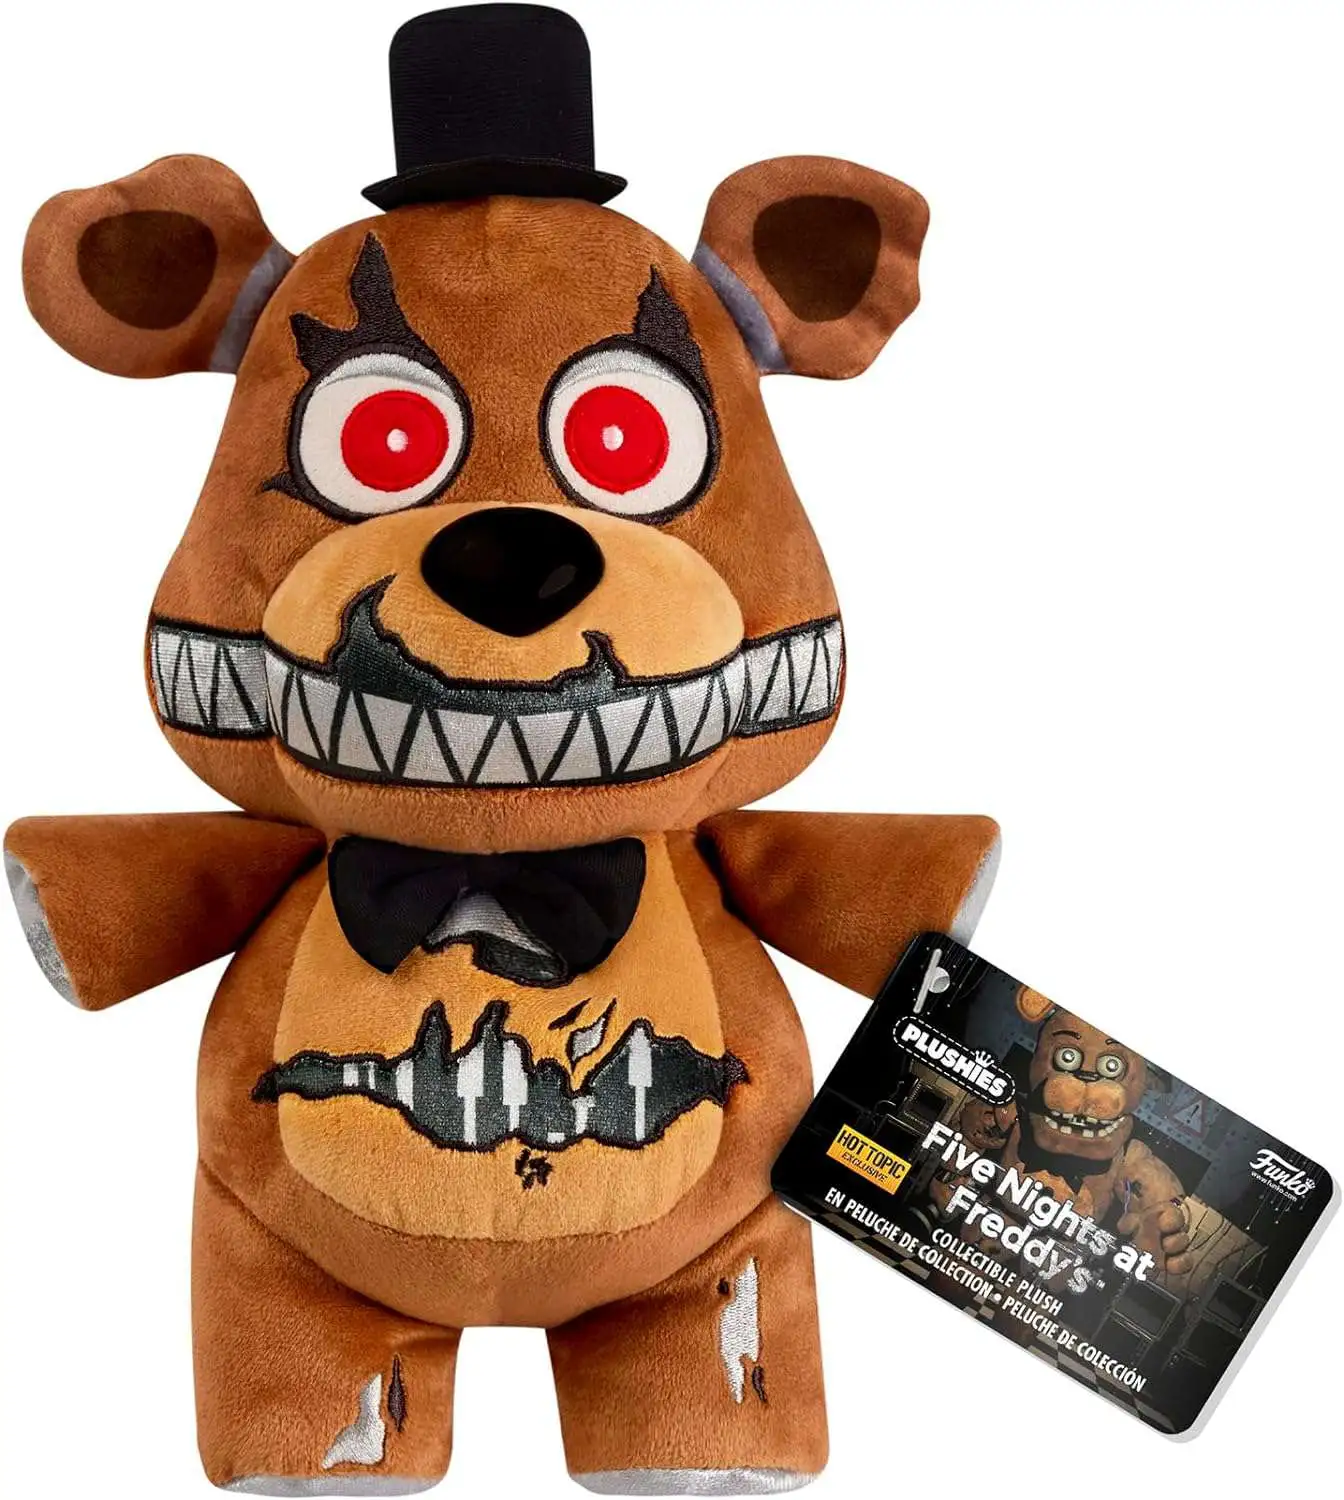 Funko Five Nights at Freddy's Inverted Plush - Special Delivery Freddy